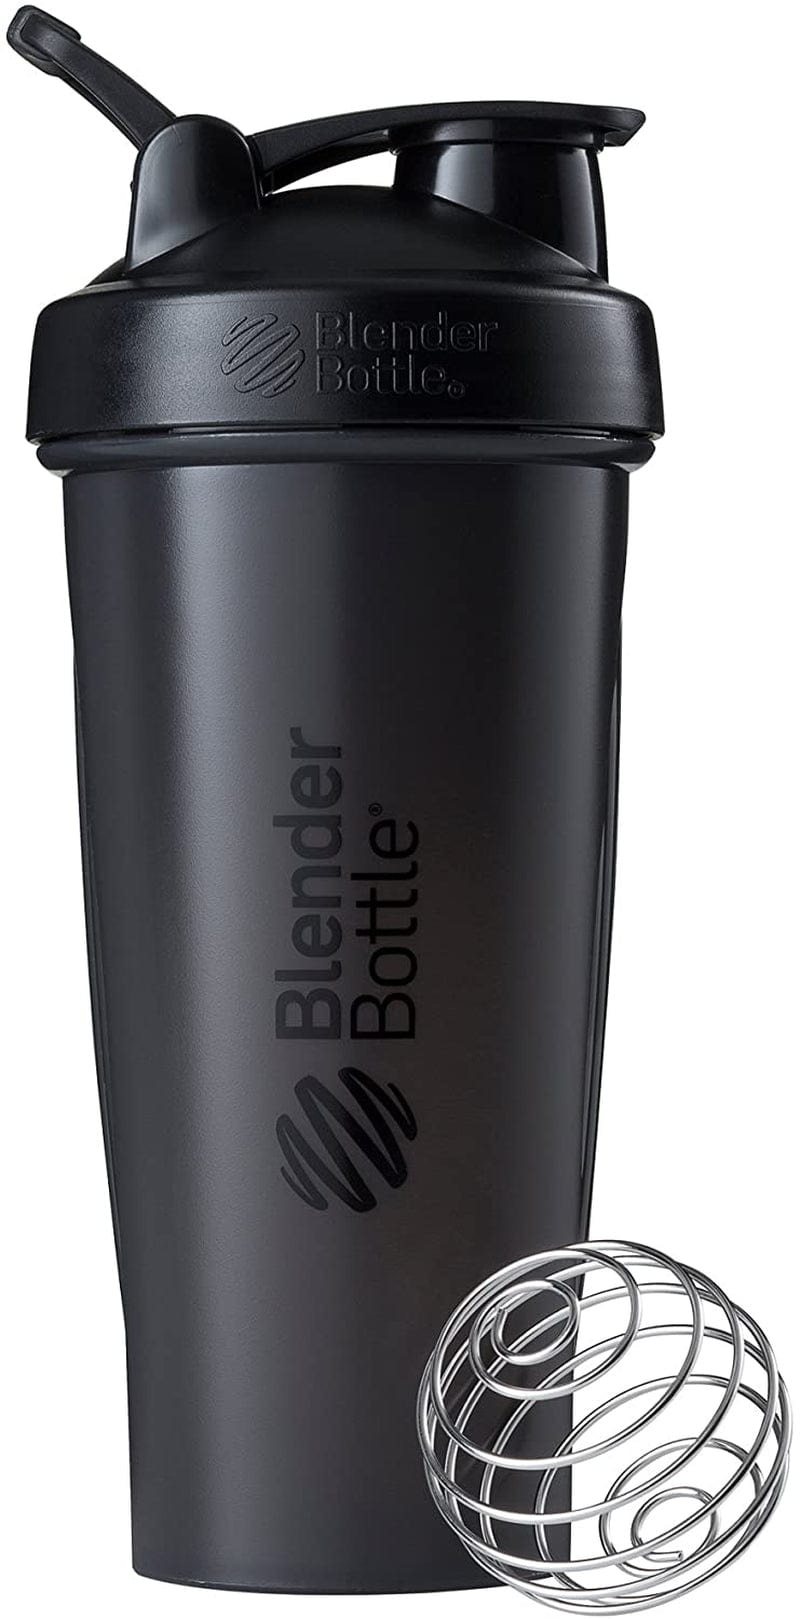 Blenderbottle Classic Shaker Bottle Perfect for Protein Shakes and Pre Workout, 20-Ounce, Clear/Black/Black & Classic V2 Shaker Bottle Perfect for Protein Shakes and Pre Workout, 28-Ounce, Black Home & Garden > Kitchen & Dining > Barware BlenderBottle Black Bottle 28-Ounce